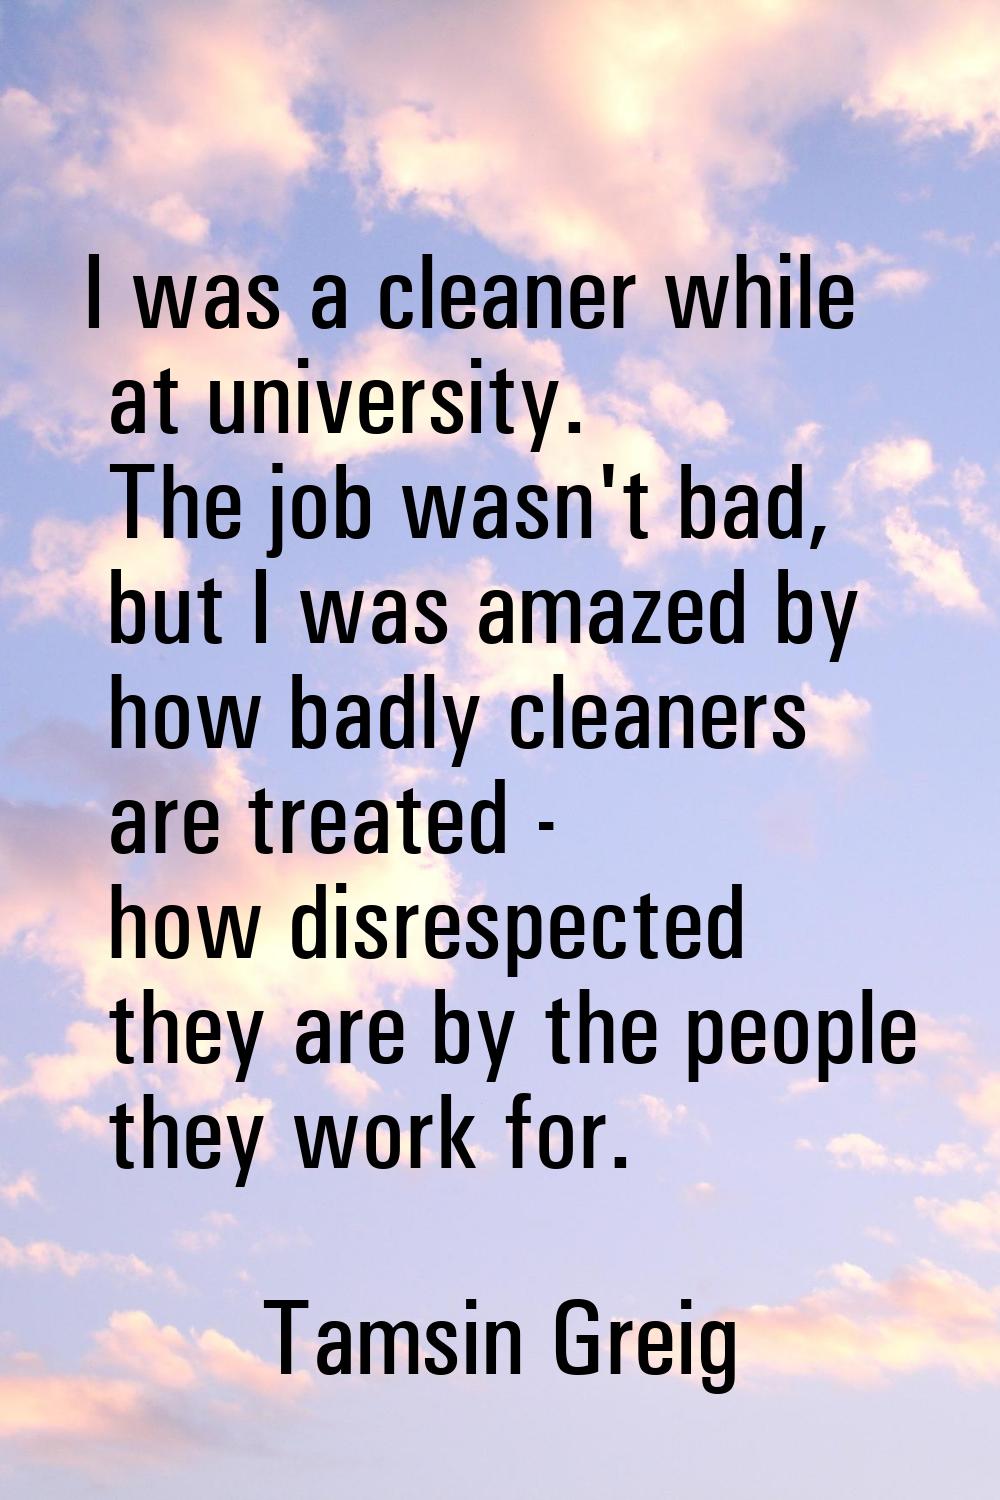 I was a cleaner while at university. The job wasn't bad, but I was amazed by how badly cleaners are